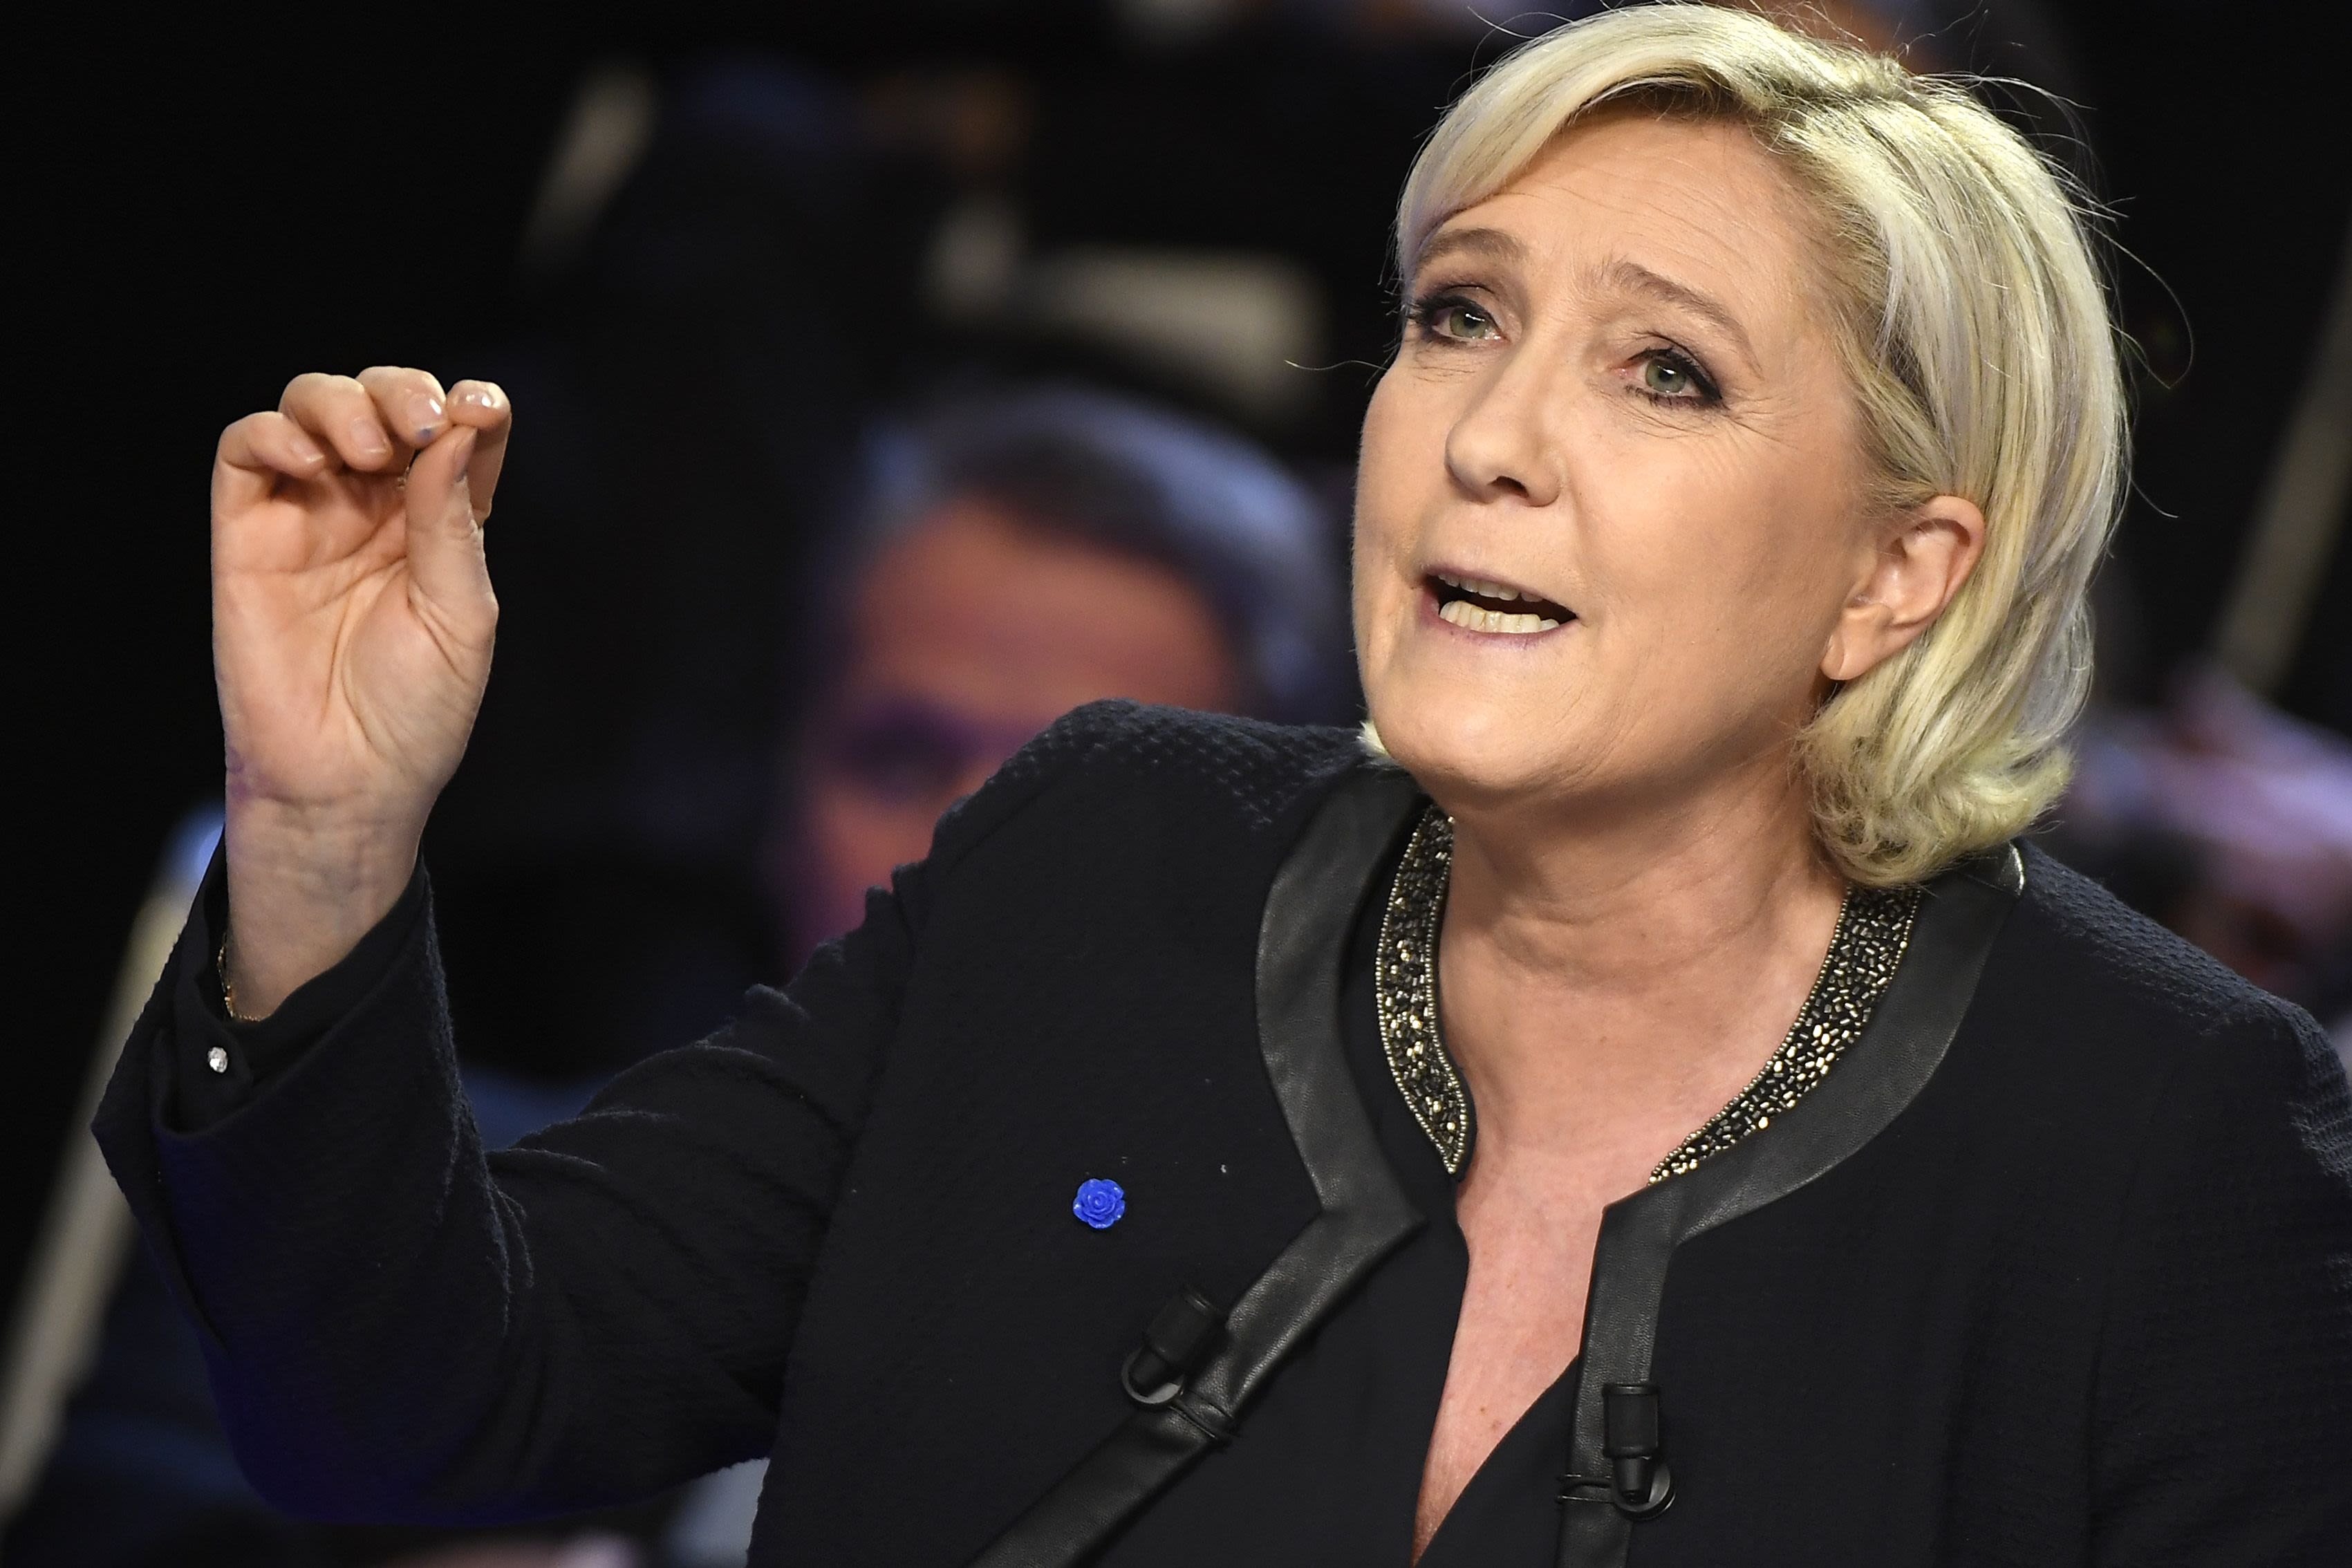 Marine Le Pen has changed her policies losing the 2017